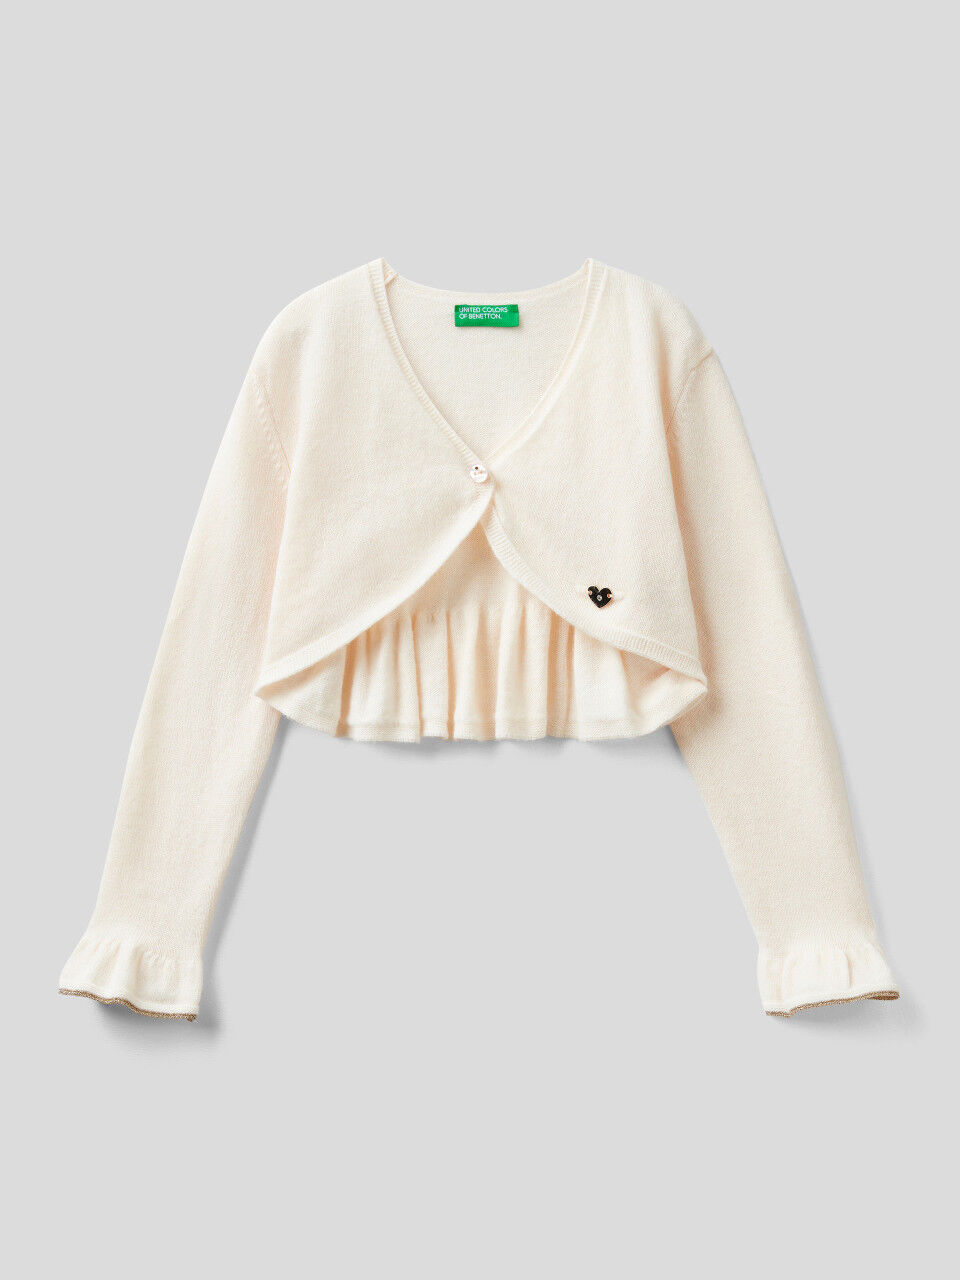 United Colors of Benetton Girls Sweater 